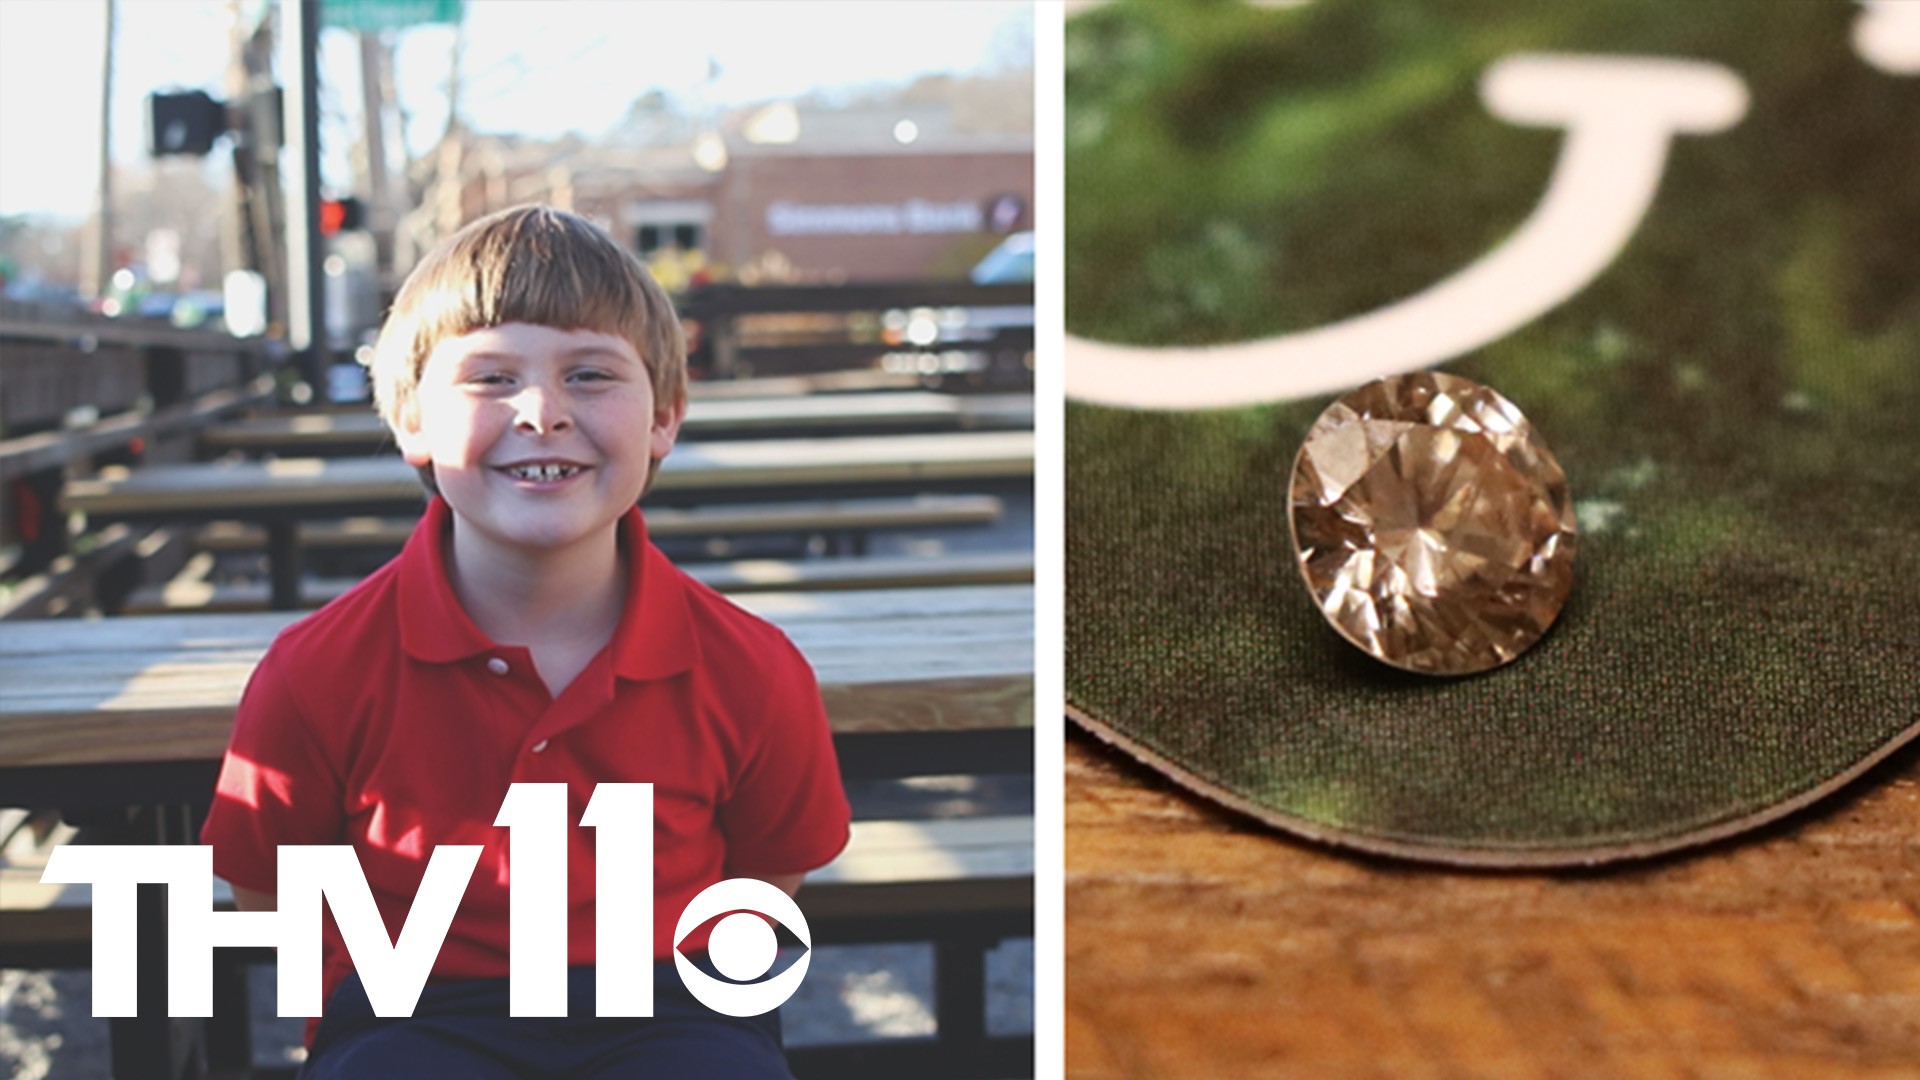 An Arkansas kid found a diamond in the gravel at a popular Little Rock restaurant. The owner, who happens to work for THV11, is reminded of the goodness in others.